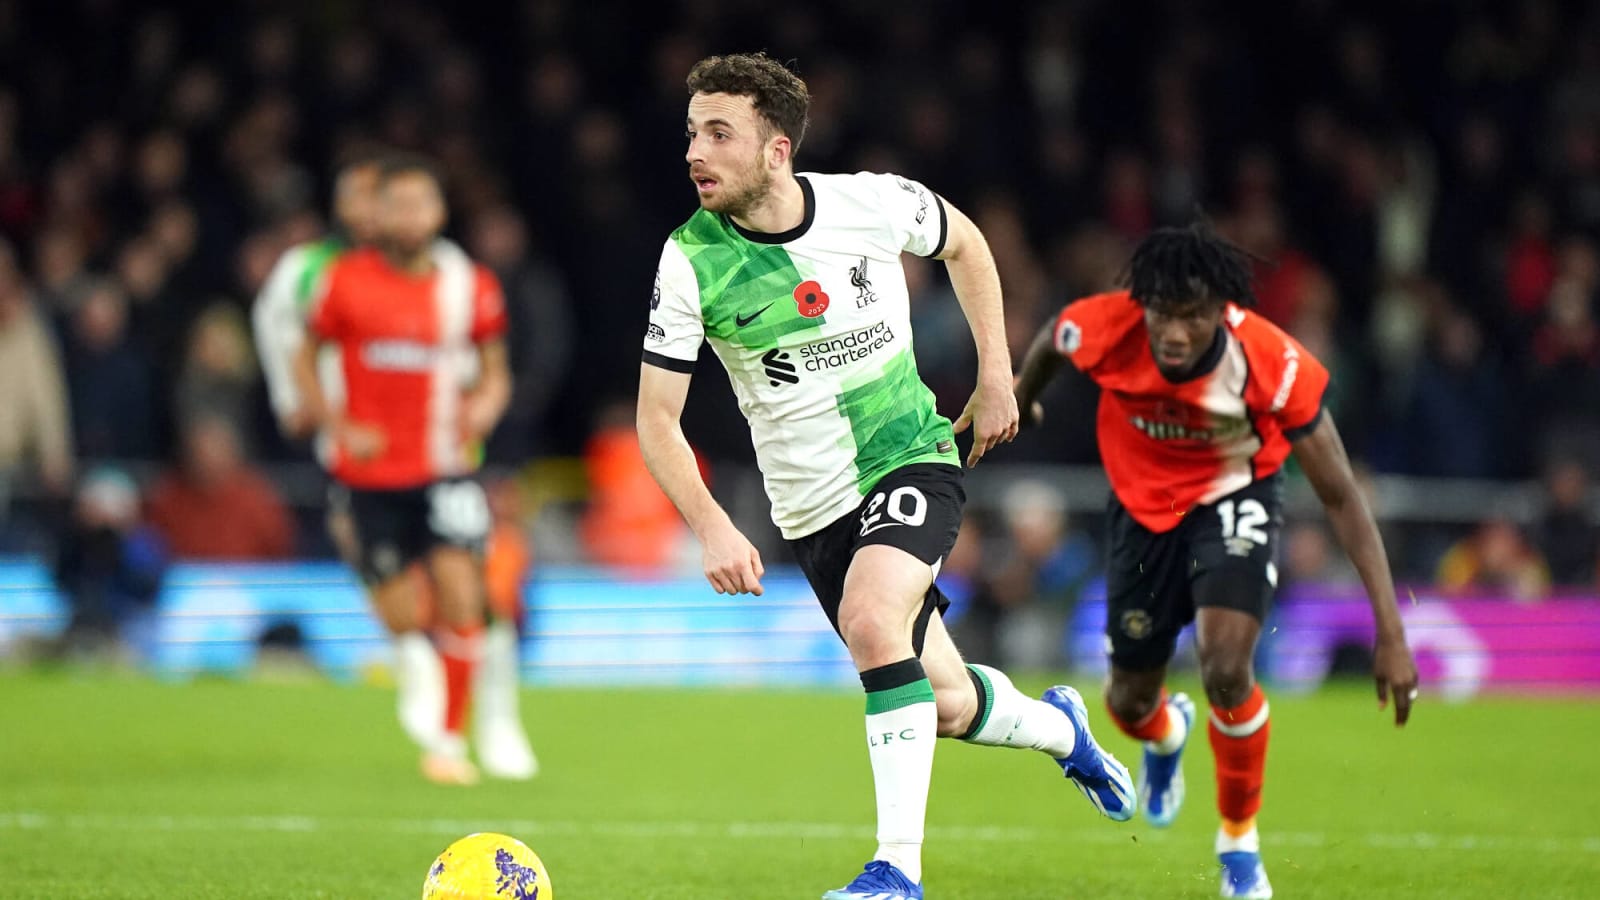 Watch: Diogo Jota gets on the scoresheet for Liverpool as Reds defeated by Toulouse